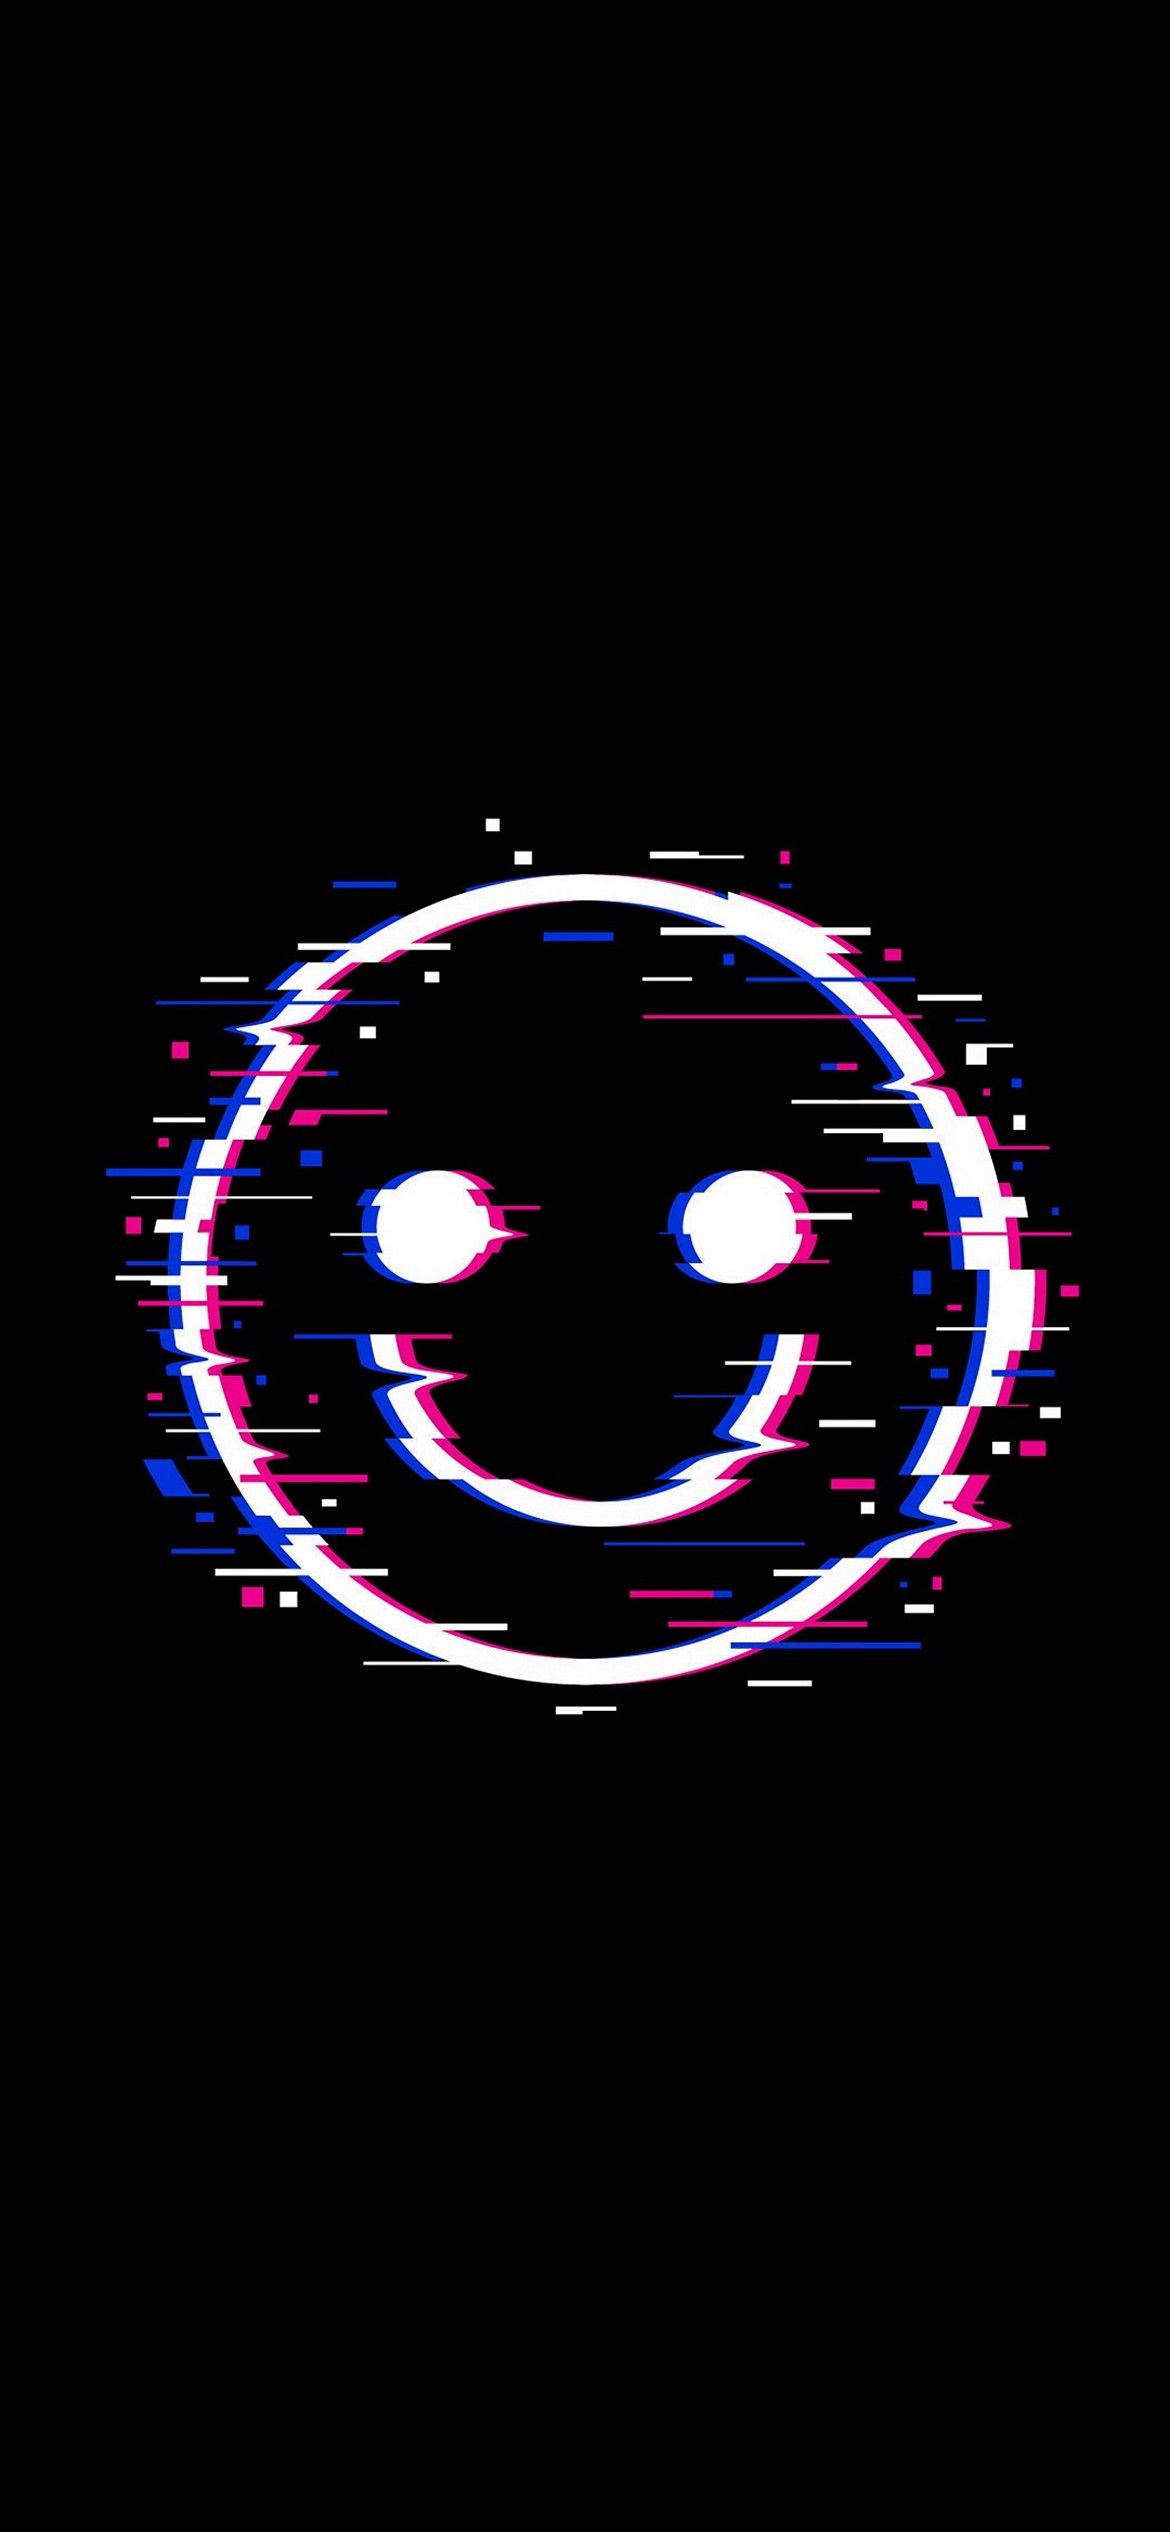 A pixelated smiley face on black background - Dark